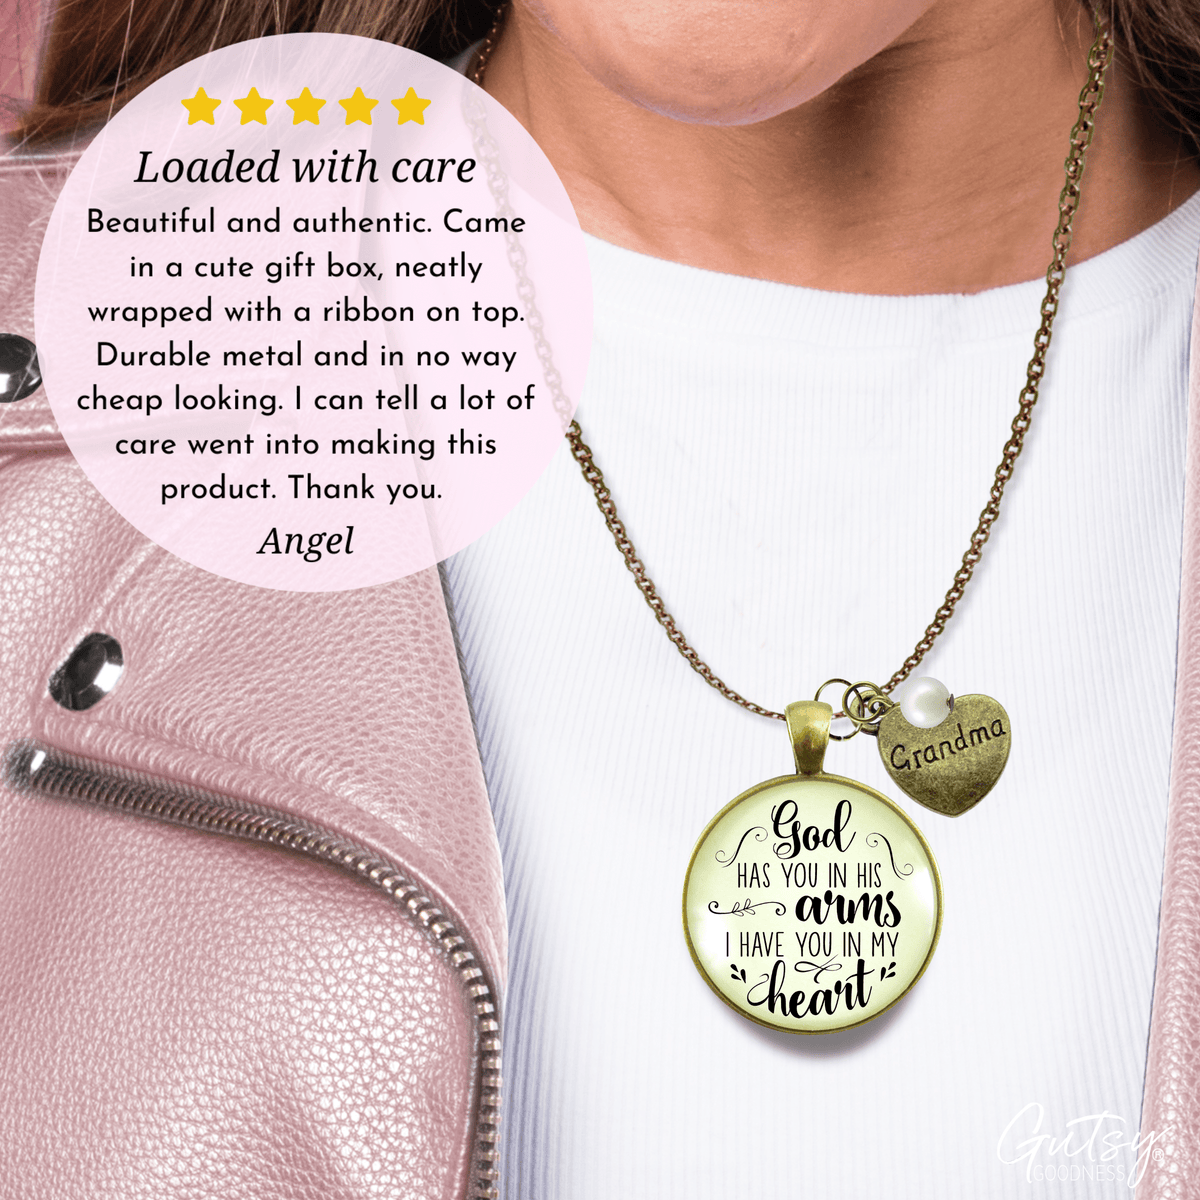 Gutsy Goodness Grandma Memorial Necklace God Has You In His Arms Grandmother Heart Gift - Gutsy Goodness;Grandma Memorial Necklace God Has You In His Arms Grandmother Heart Gift - Gutsy Goodness Handmade Jewelry Gifts